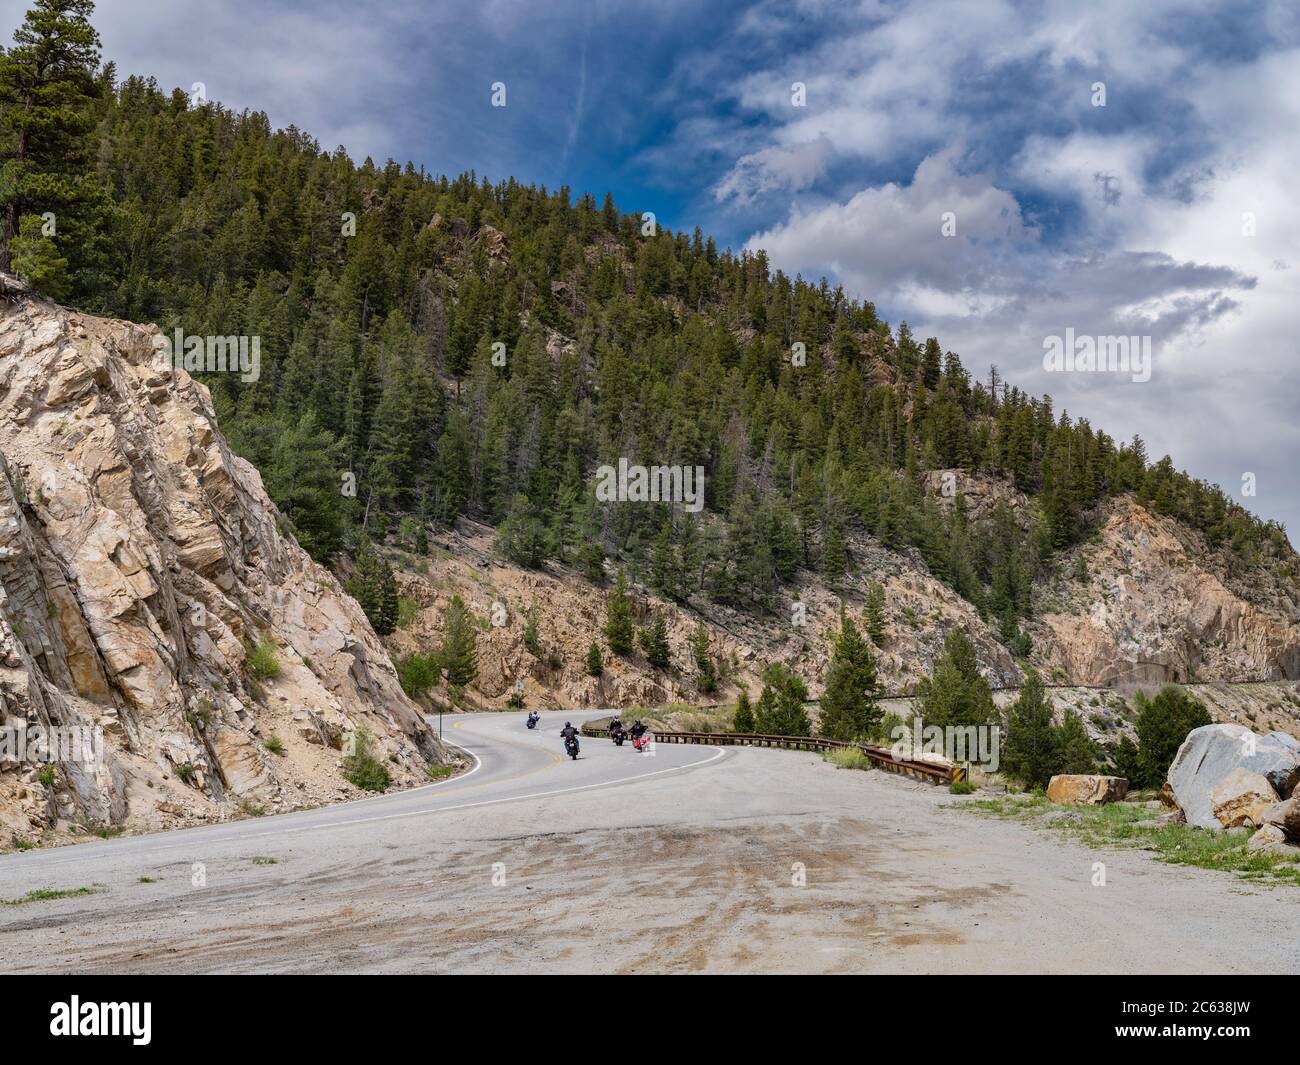 Group of motorcycles on curved highway through rocky mountains, Colorado, USA Stock Photo